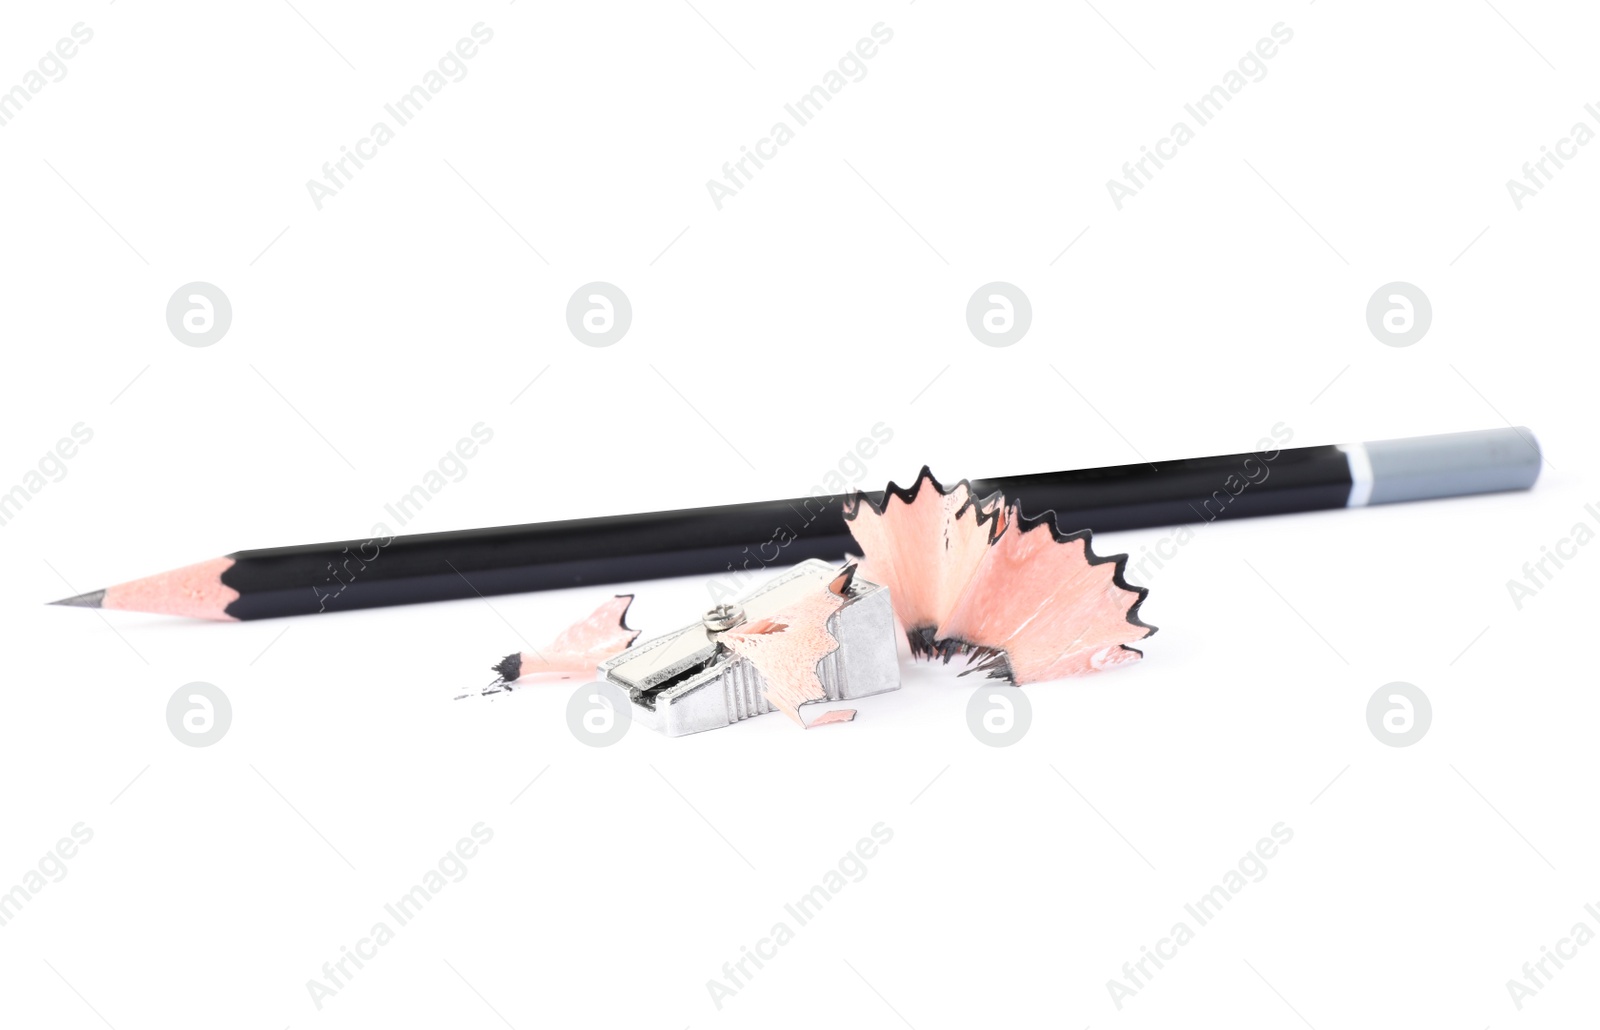 Photo of Metal sharpener with shavings and pencil on white background